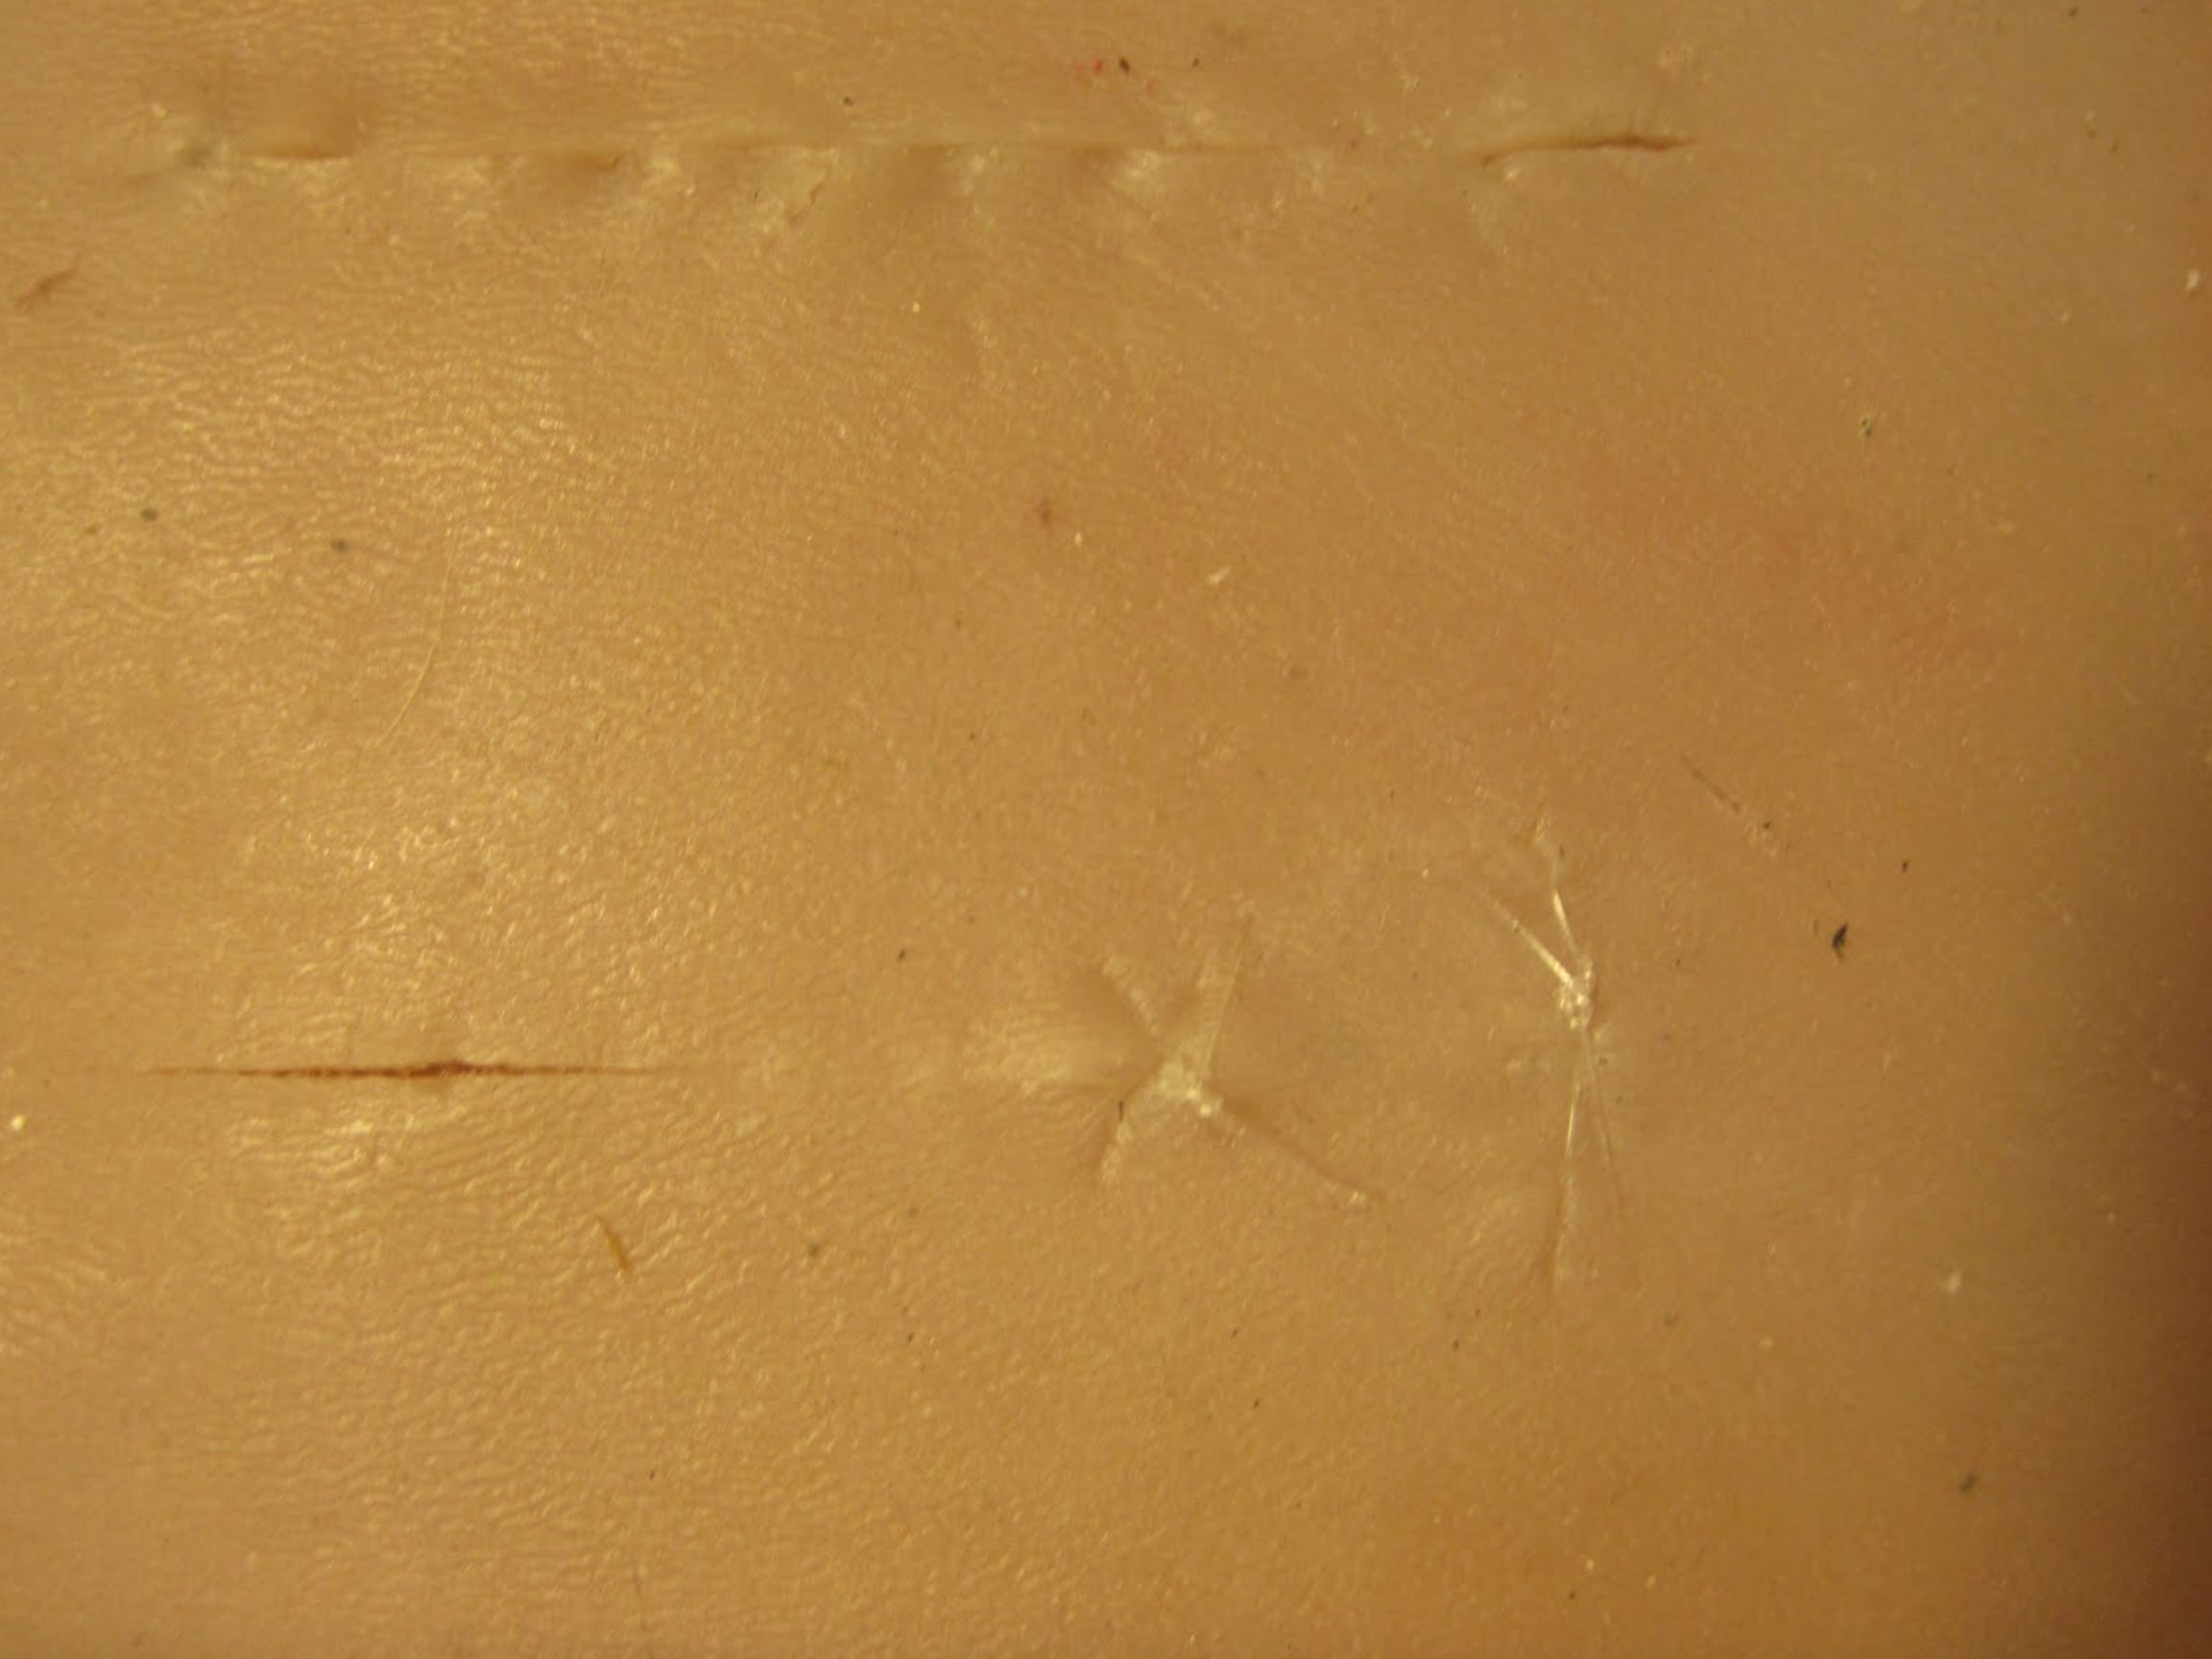  Not a very good picture of our suture pad(latest prototype). It performed very well when tested by  Dr. Emma Read  at then University of Calgary Faculty of Veterinary medicine. They will be tested further during OSCE’s (Objective Structured Clinical